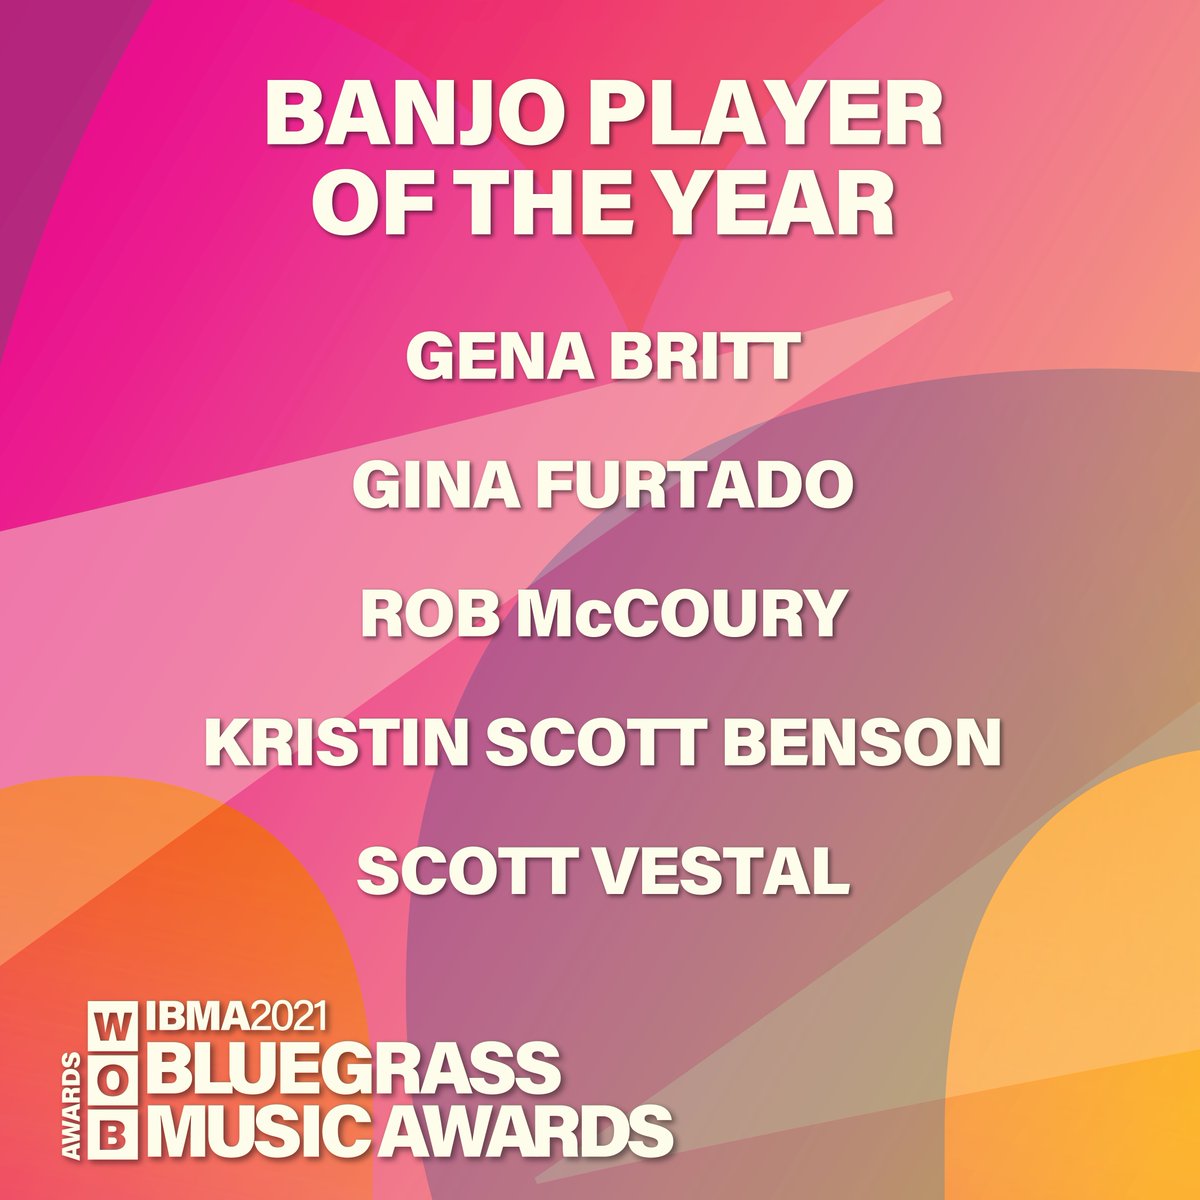 Congratulations to the Banjo Player of the Year nominees for the 2021 IBMA Bluegrass Music Awards presented by @YamahaGuitars!

@genabritt, #GinaFurtado, #RobMcCoury, #KristinScottBenson, and #ScottVestal 

#banjo #bluegrass #IBMA #IBMAWOB2021